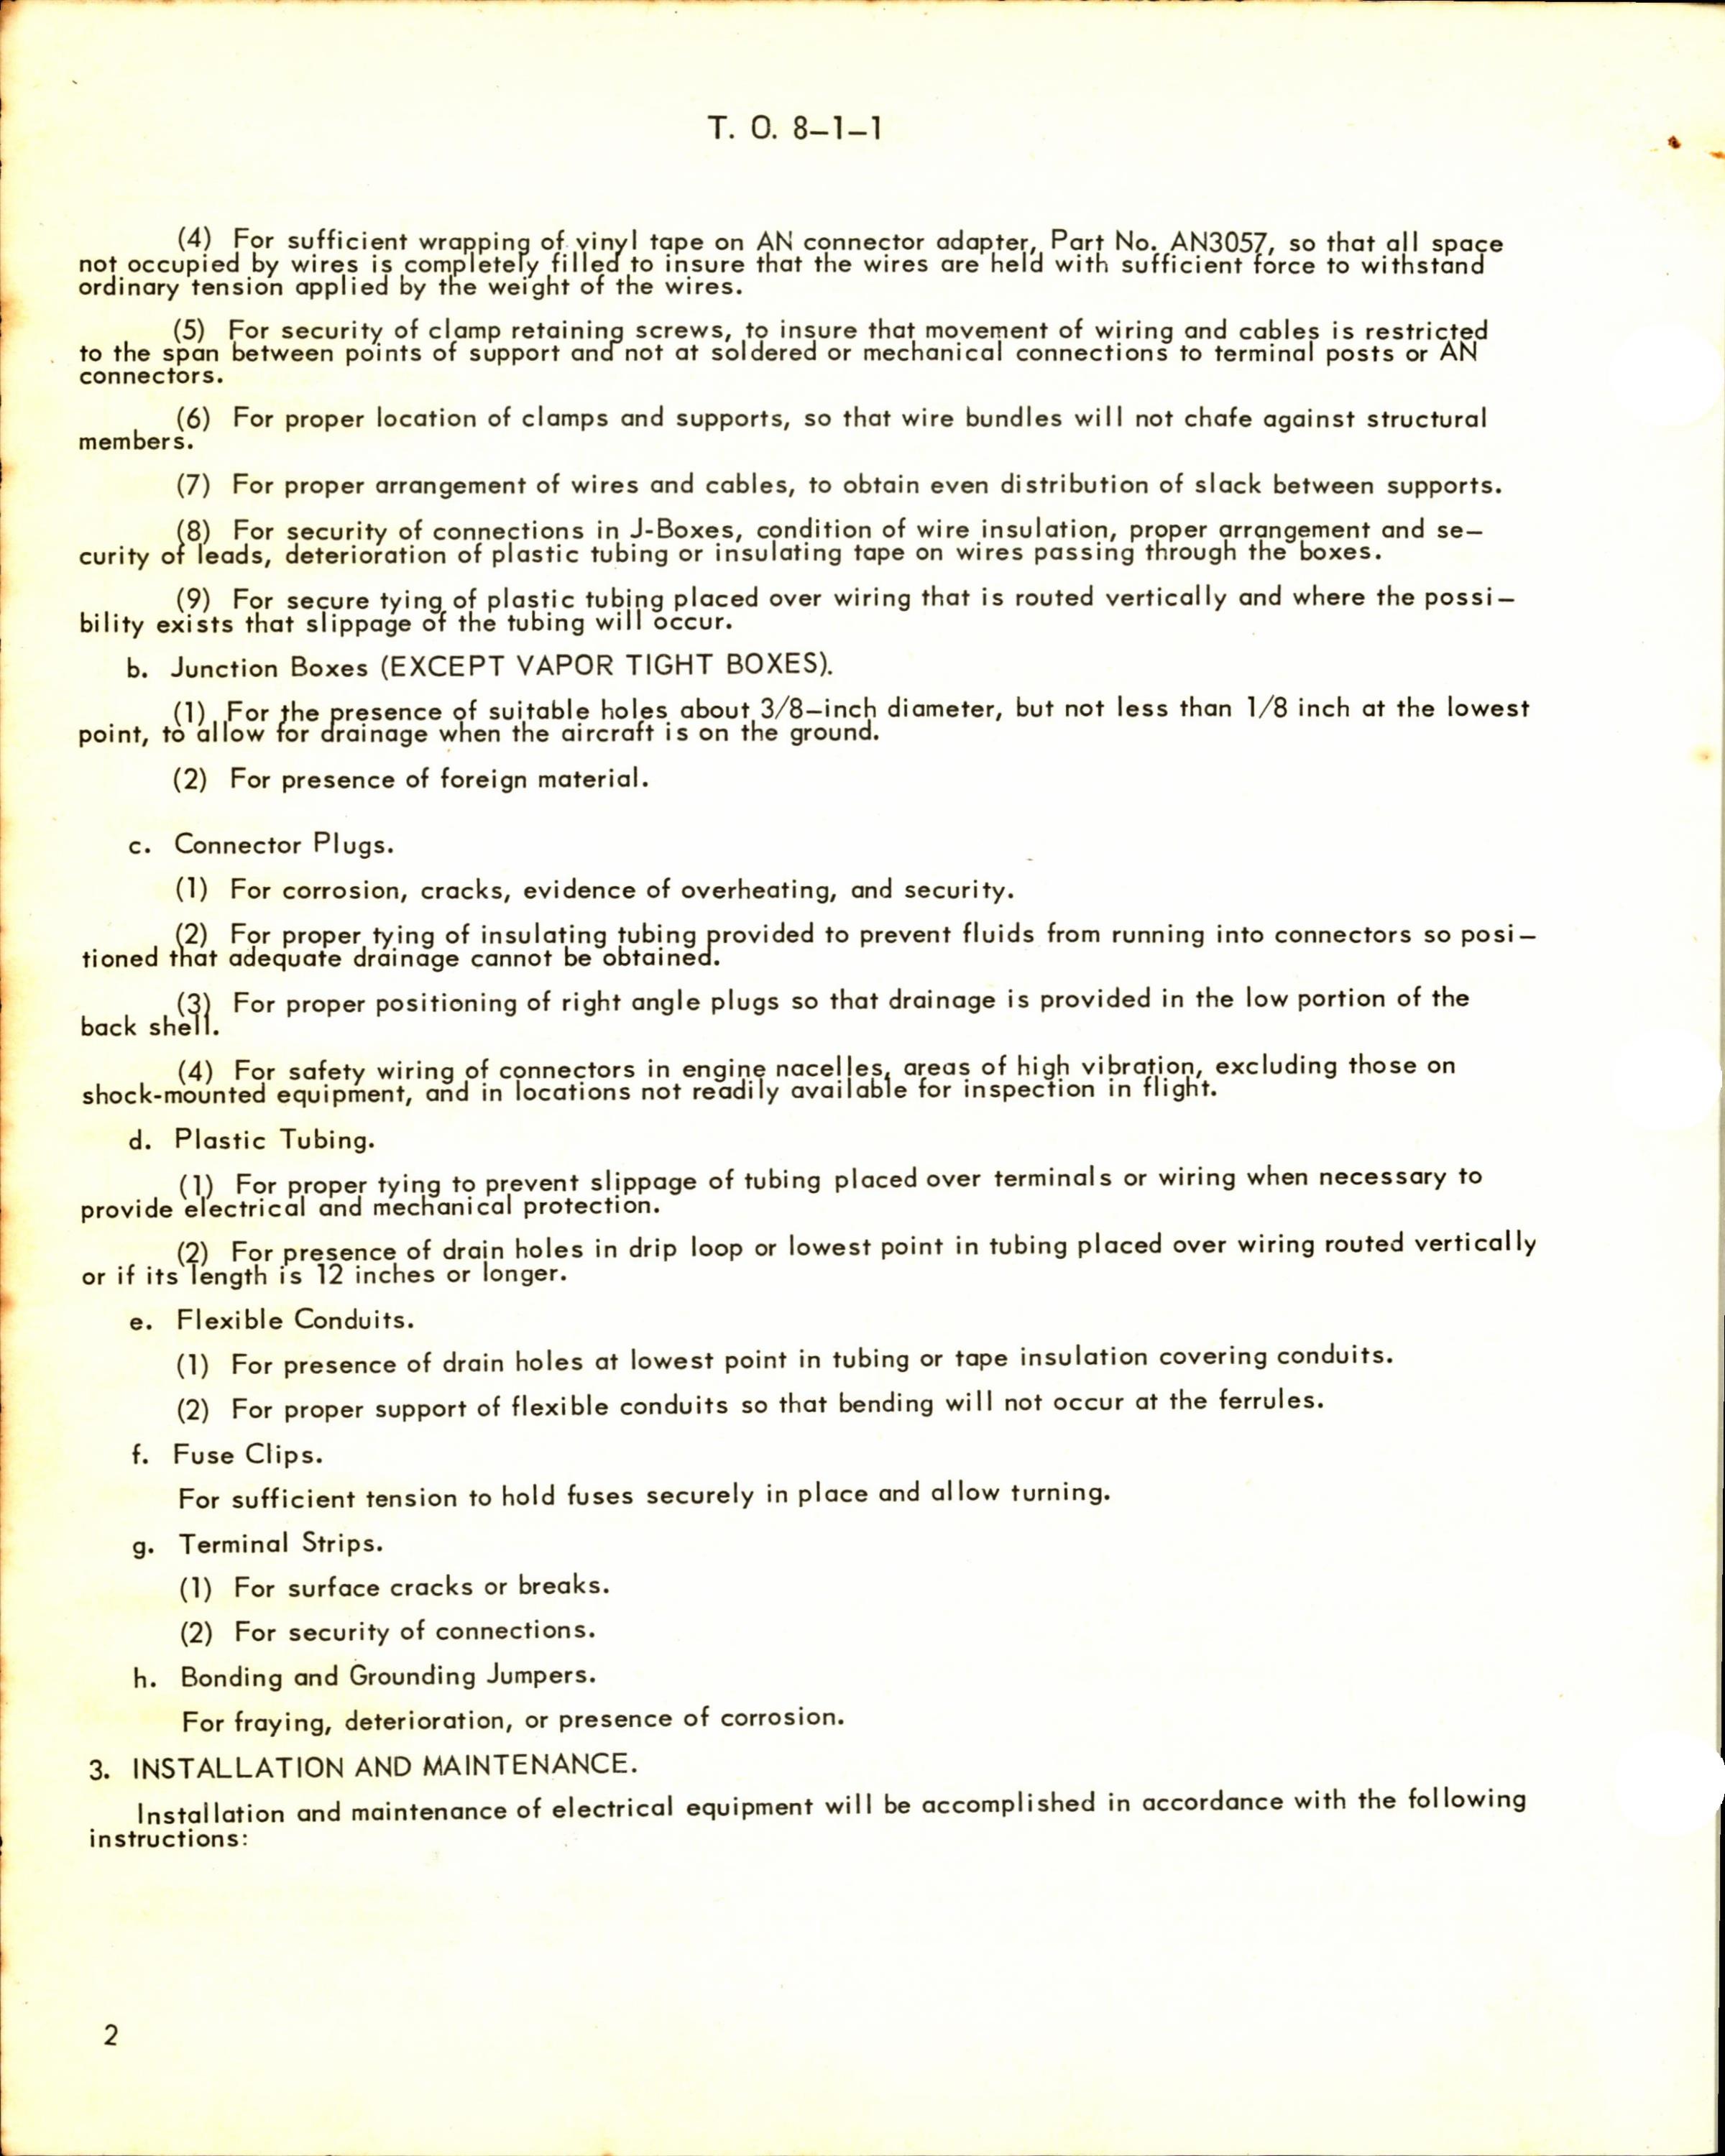 Sample page 2 from AirCorps Library document: Aircraft Electrical System Inspection Maintenance and Installation Procedures